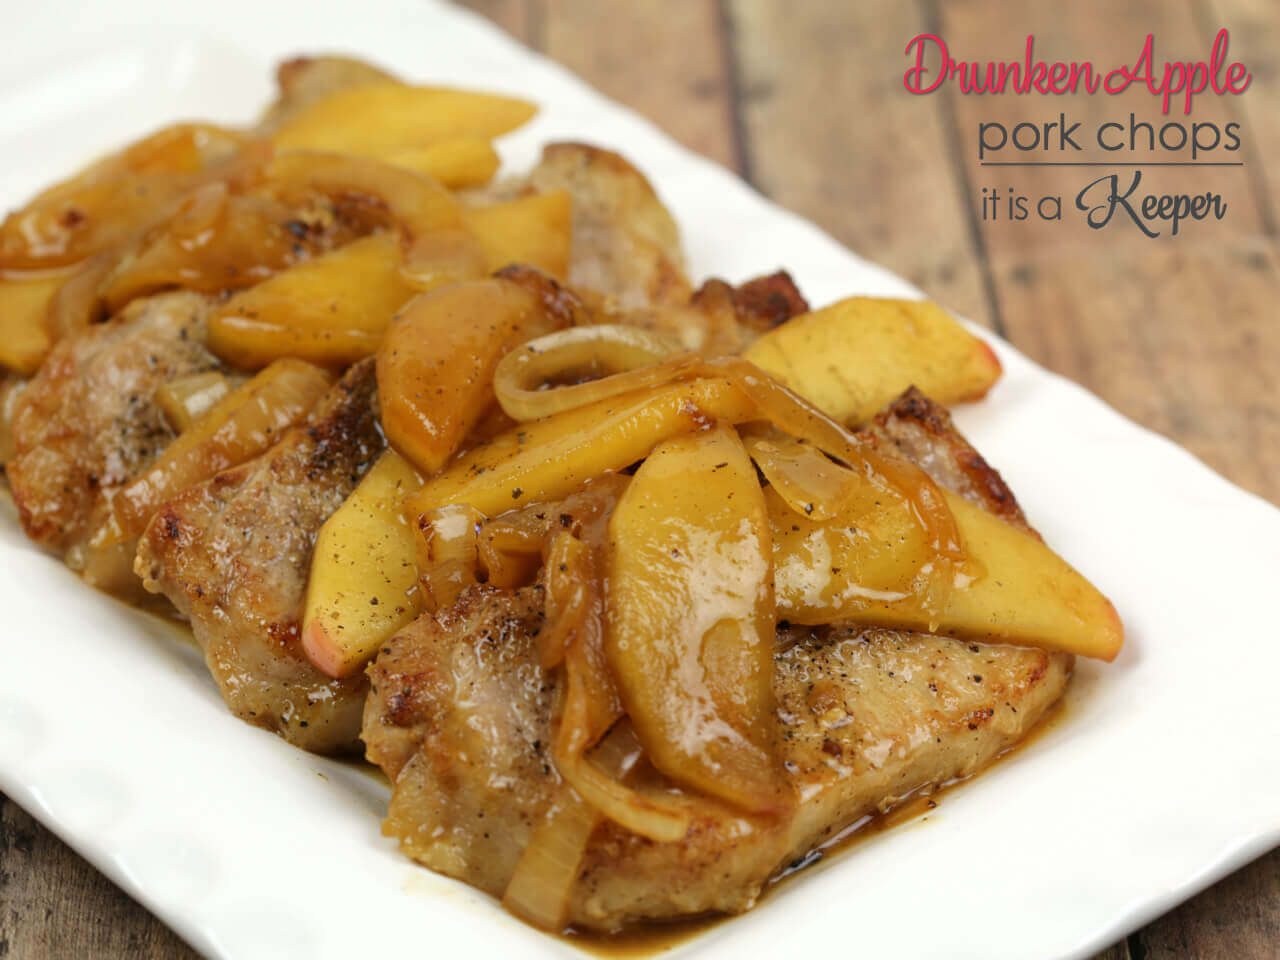 Drunken Apple Pork Chops - this easy 30 minute recipe is a quick dinner idea and perfect for busy weeknights